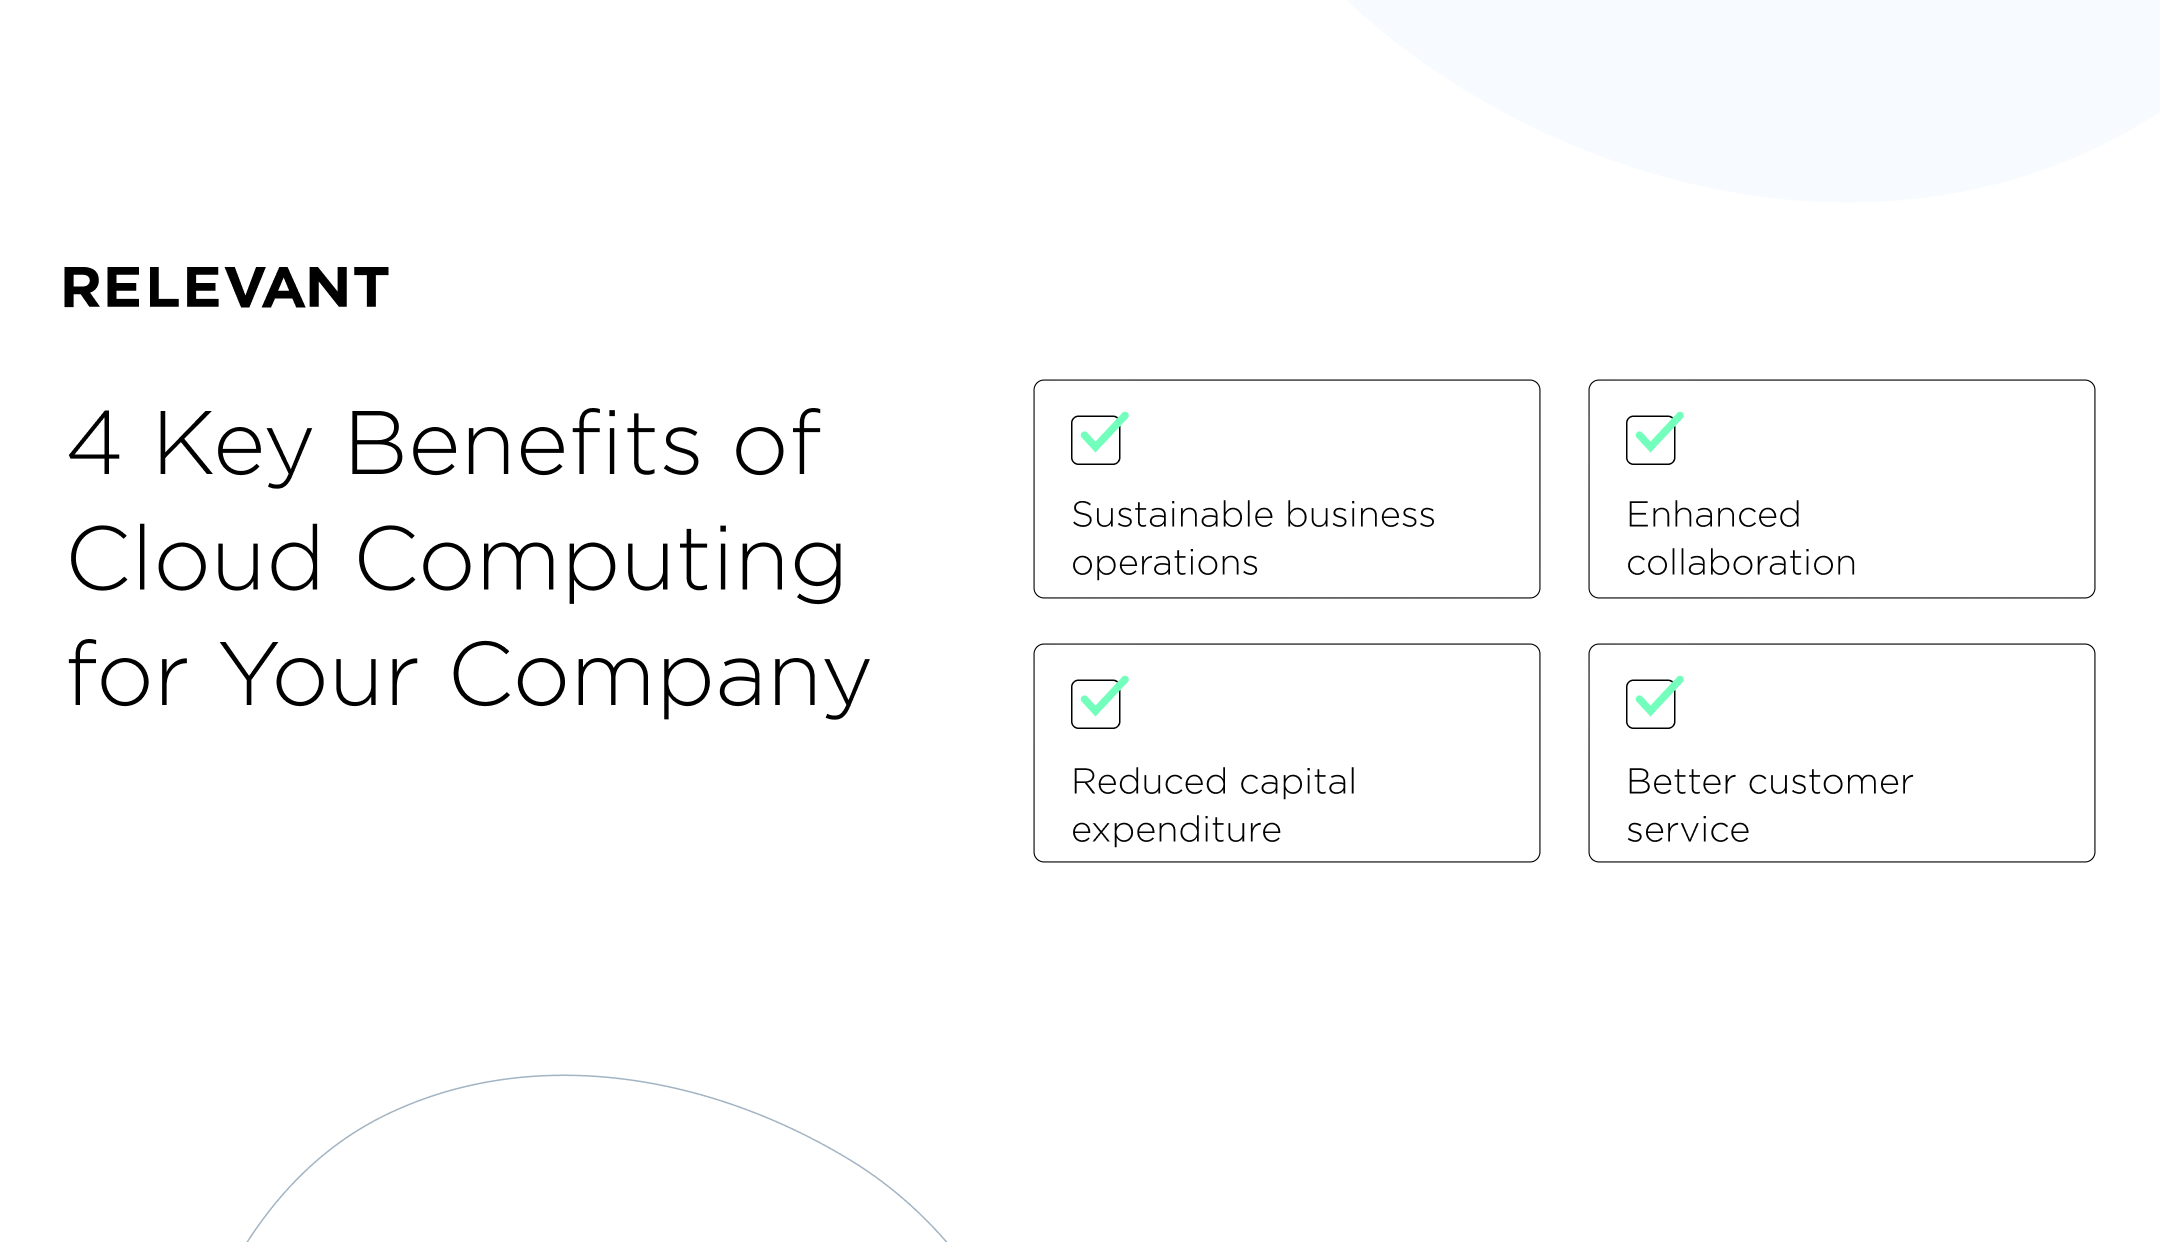 4 Key Benefits of Cloud Computing for Your Company